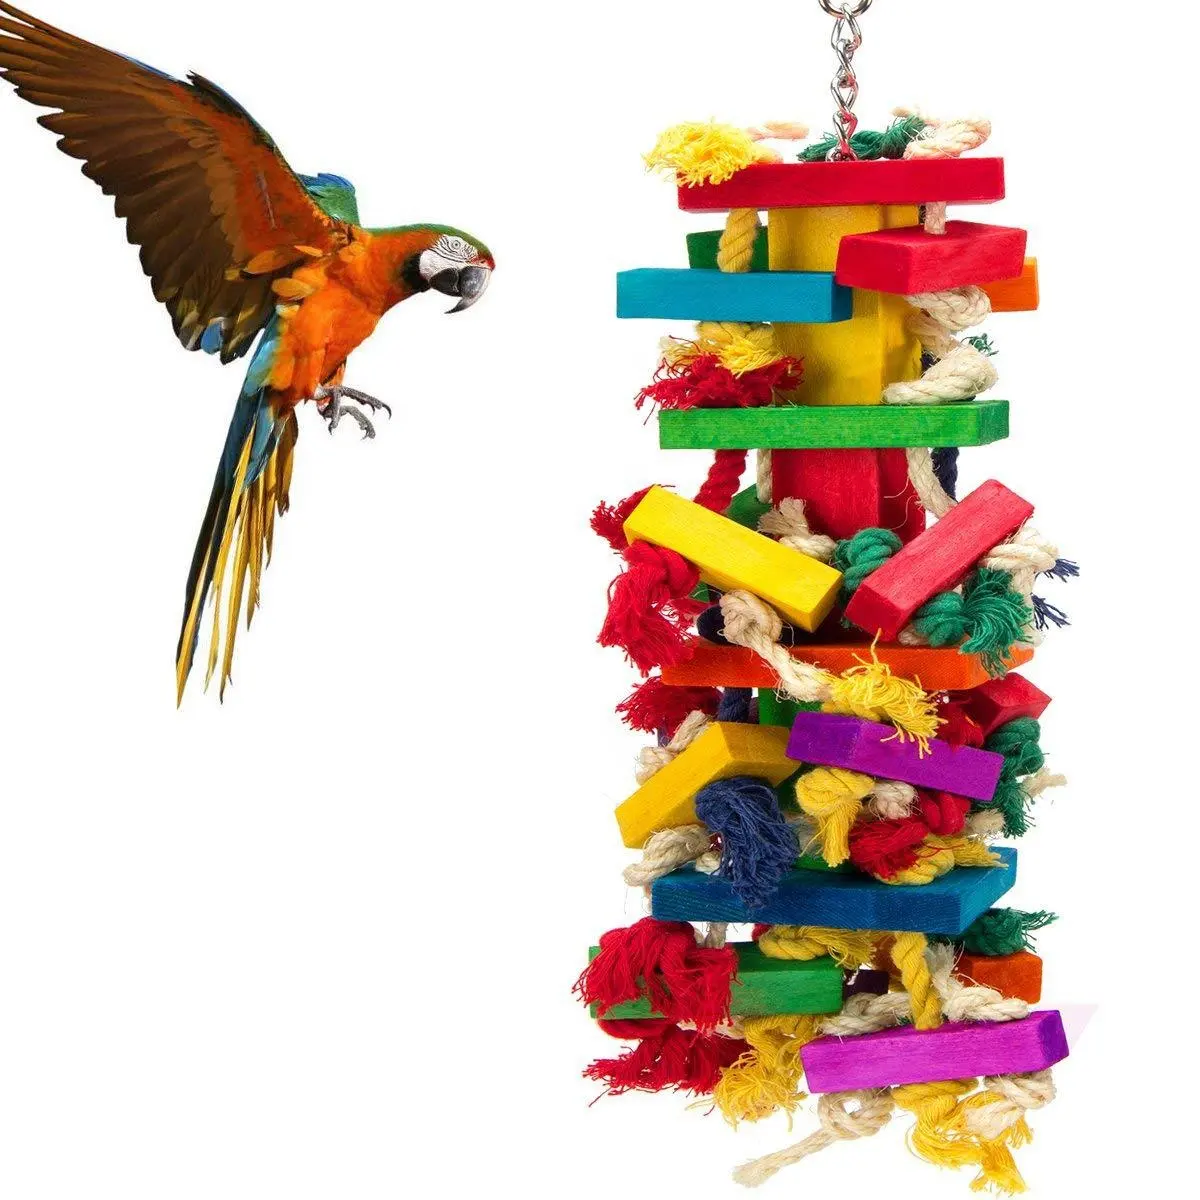 OF Hot Sale Parrot Colorful Climbing Chewing Toy Hanging Wood Funny Cotton Rope Parrot Chewing Bird Cage Bite Toys